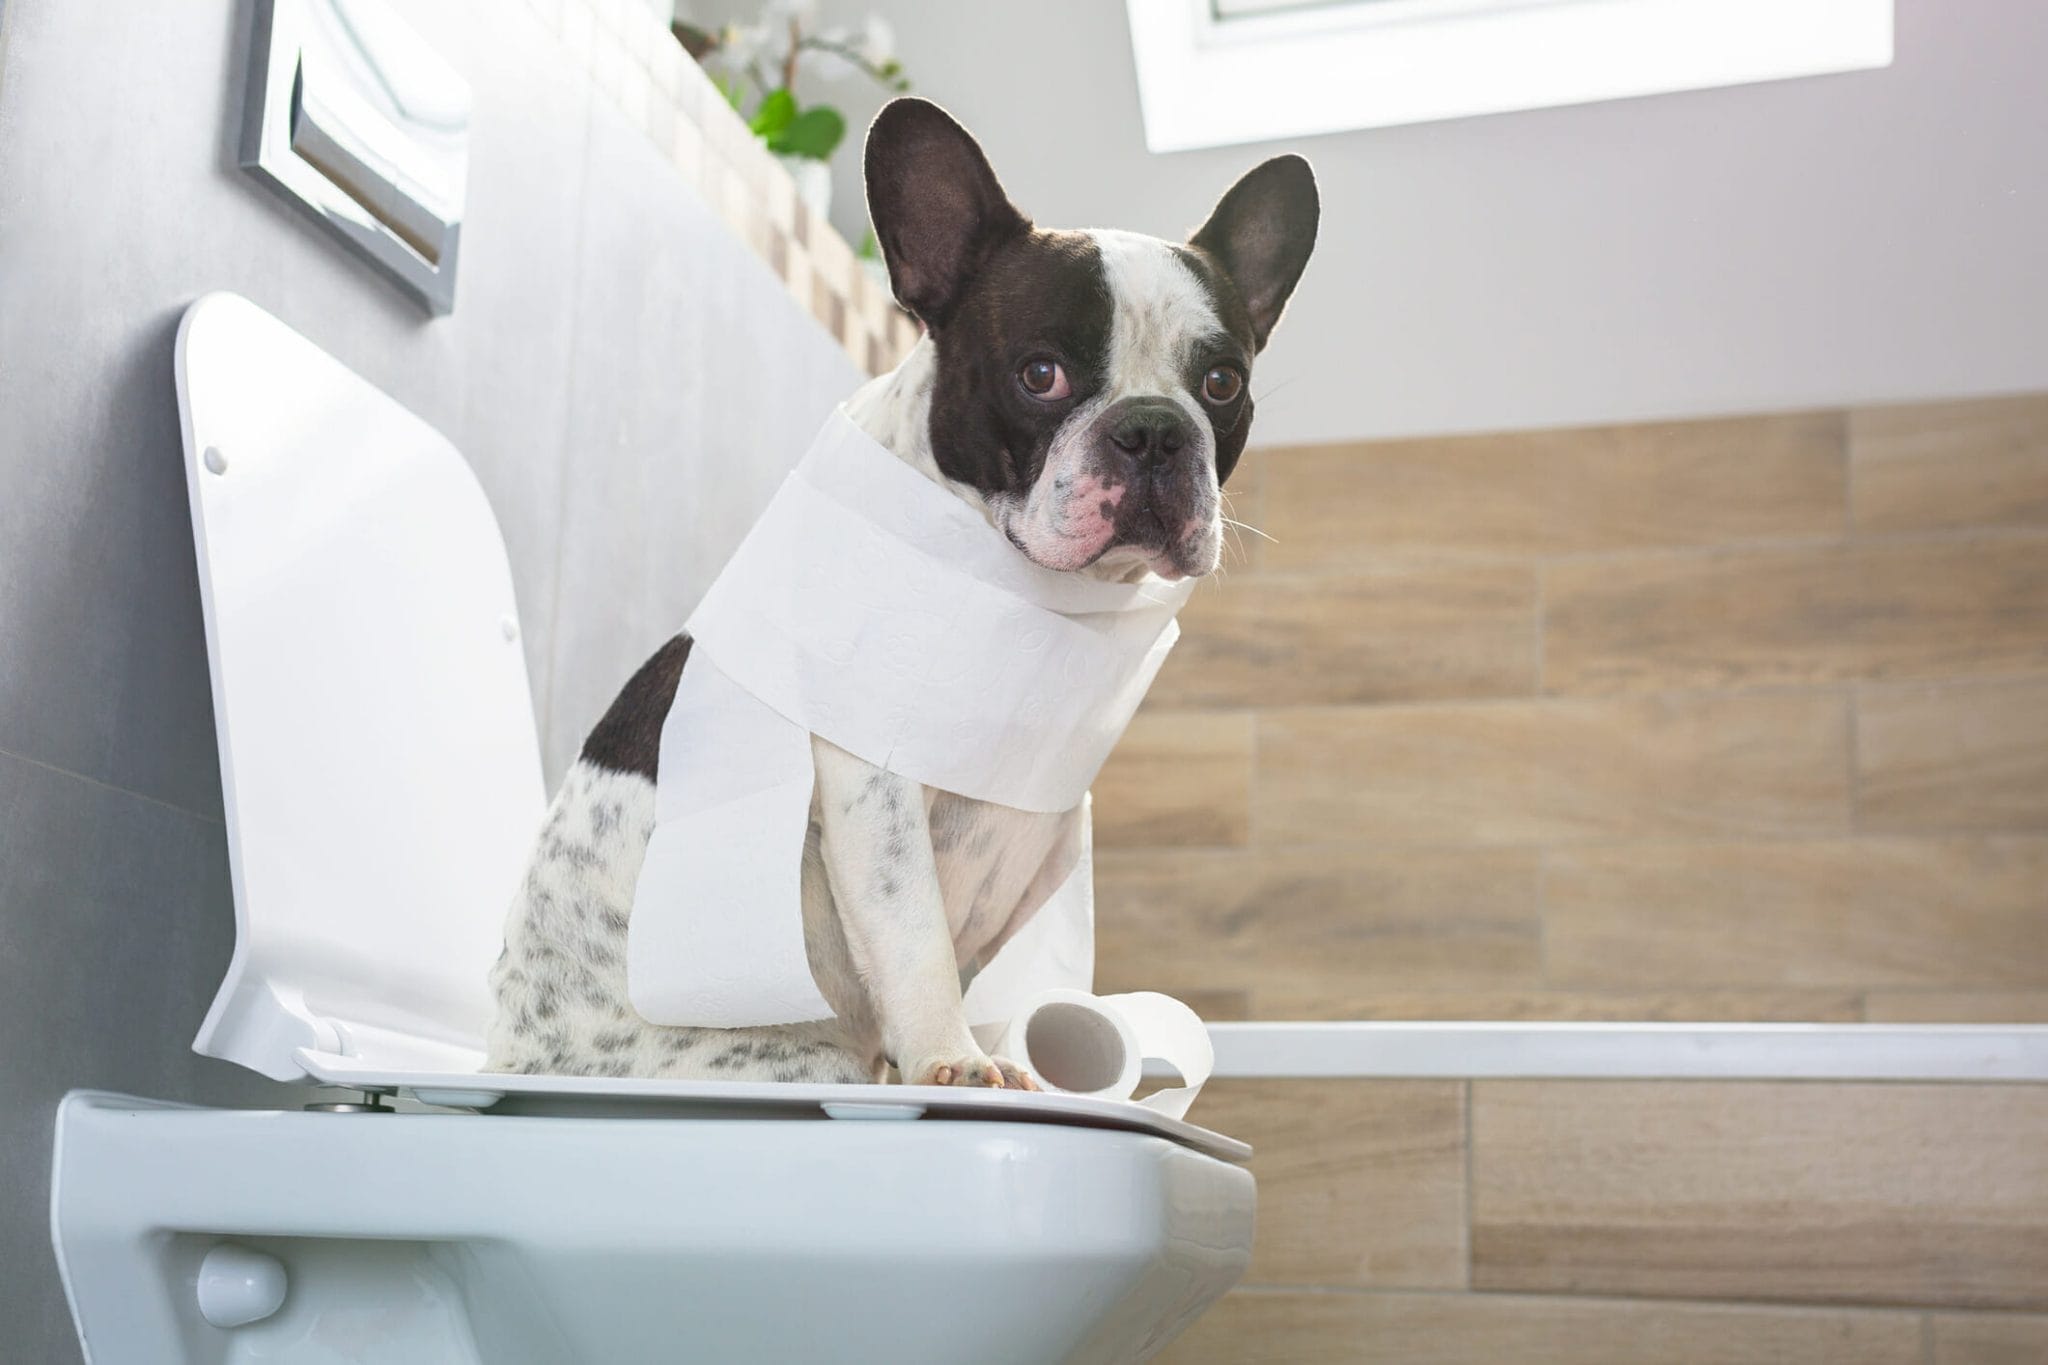 Can You Flush Dog Poop Down The Toilet